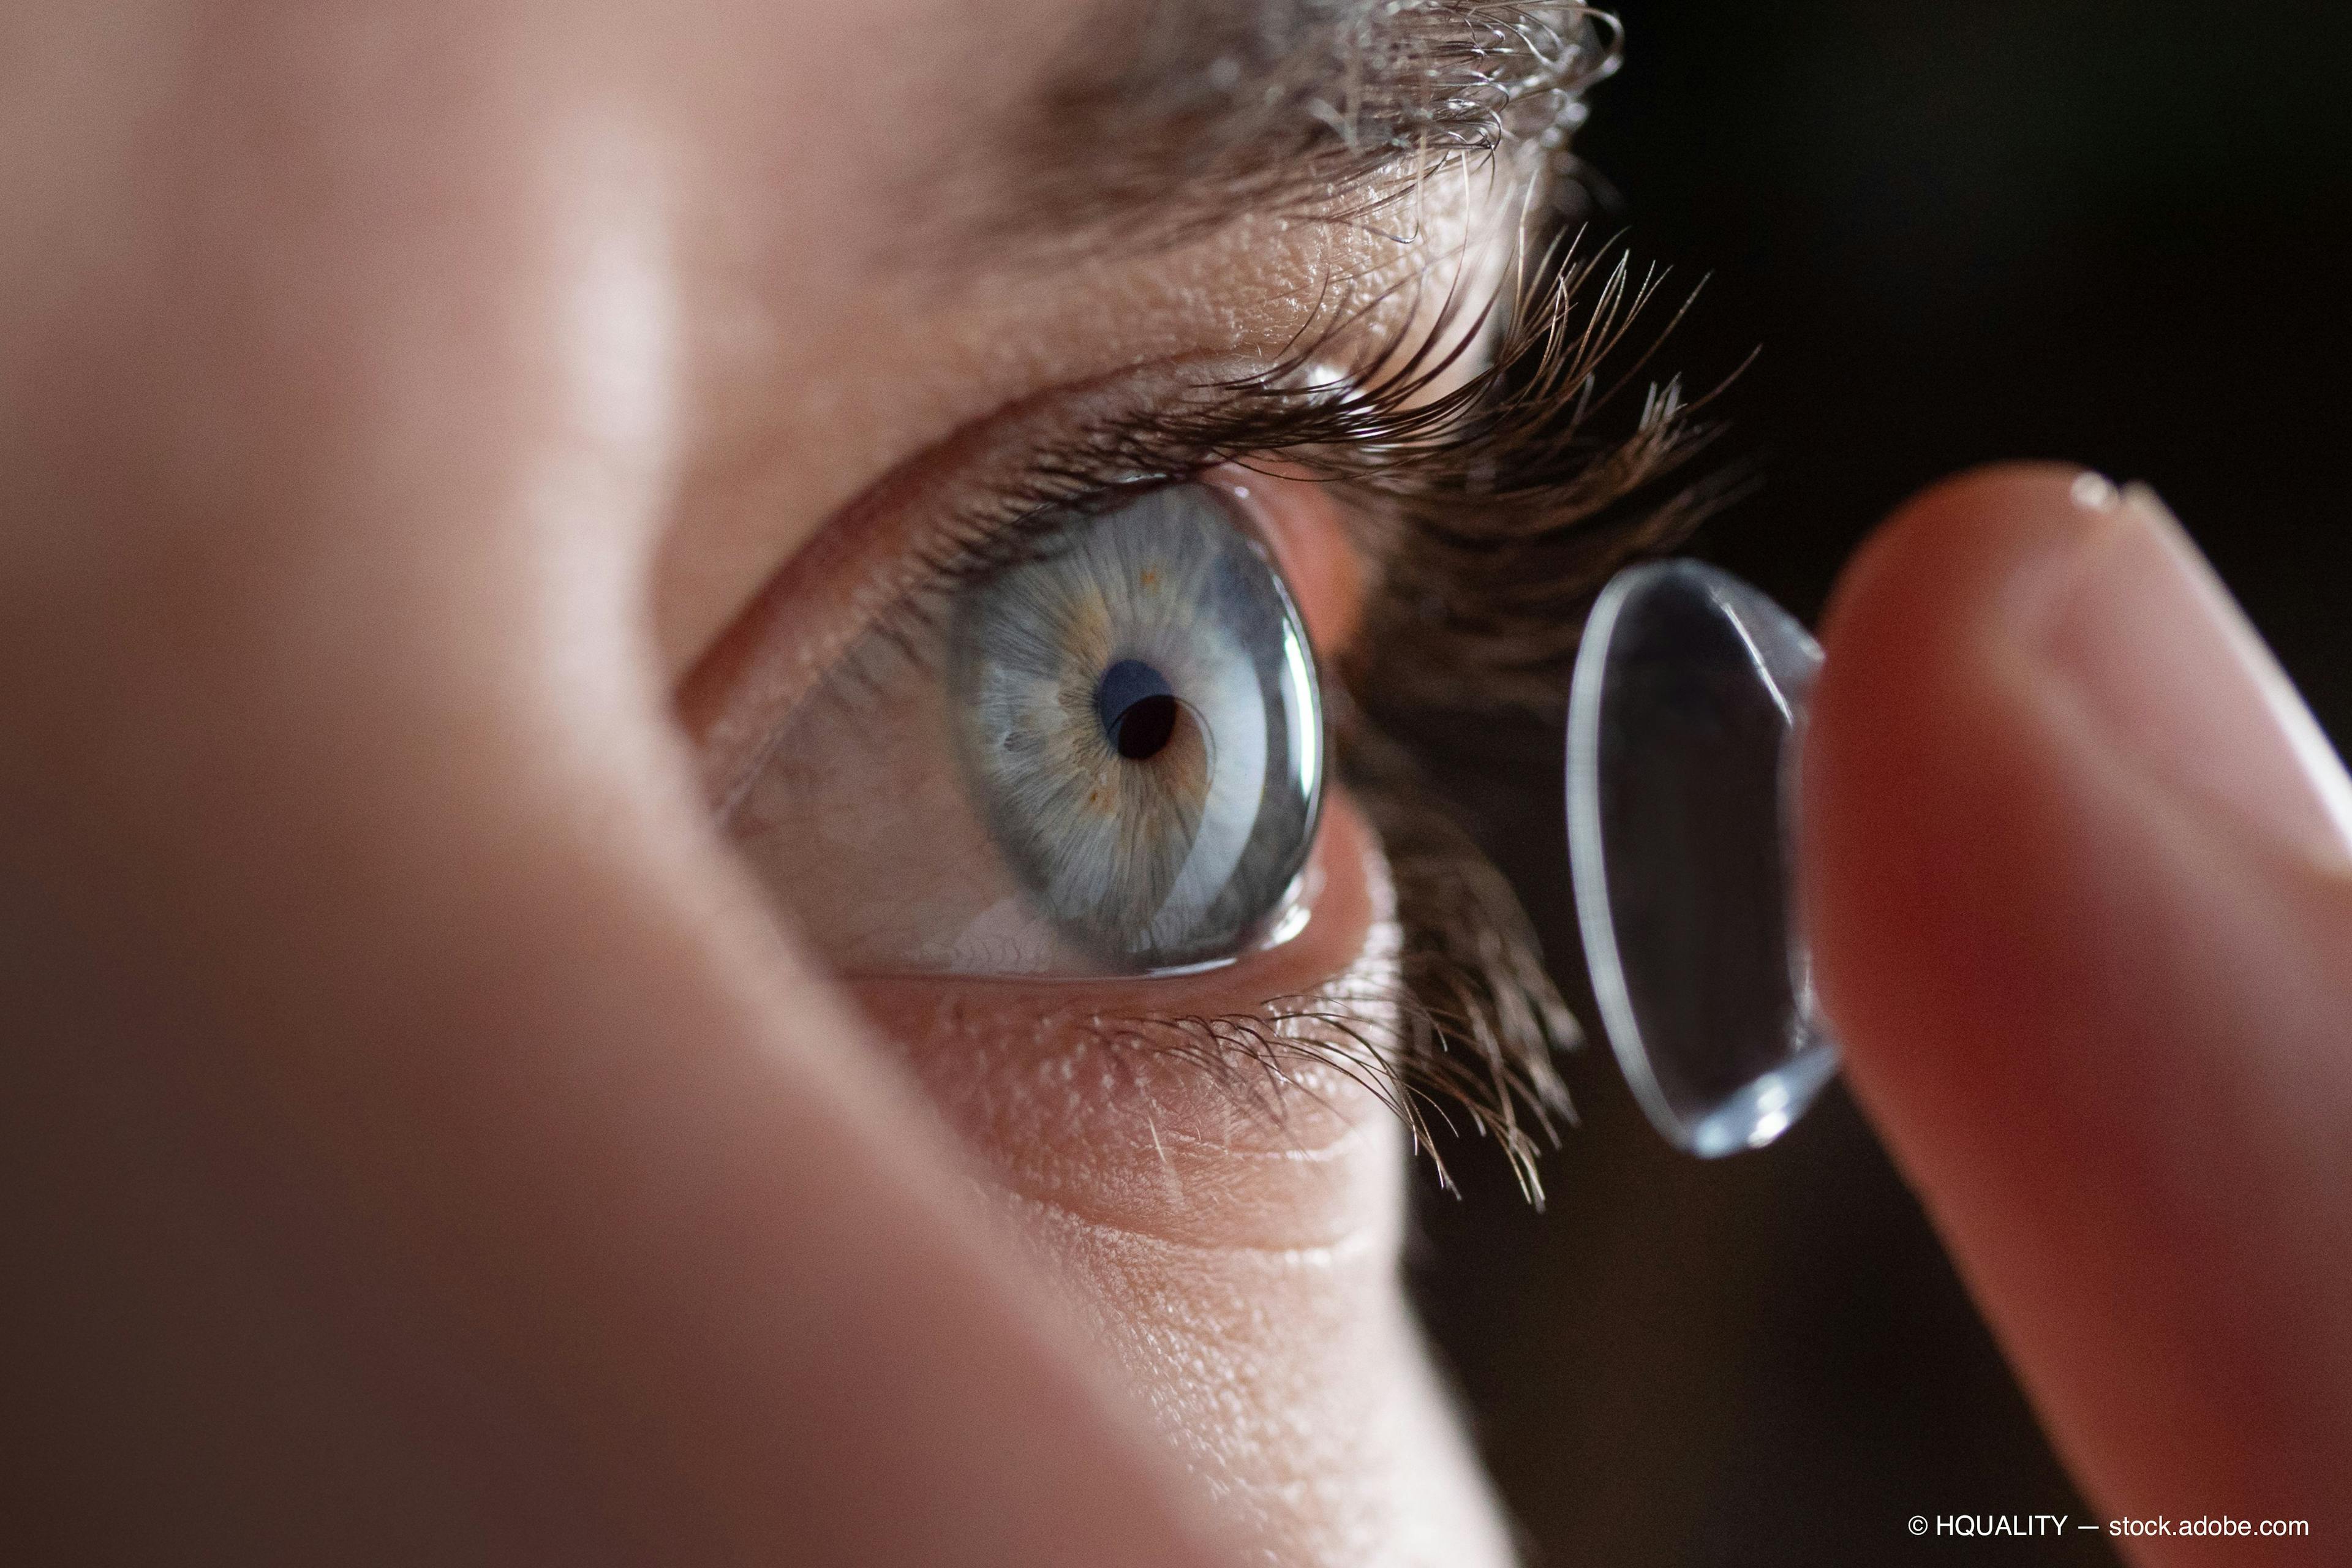 artificial tears offer path to contact lens comfort